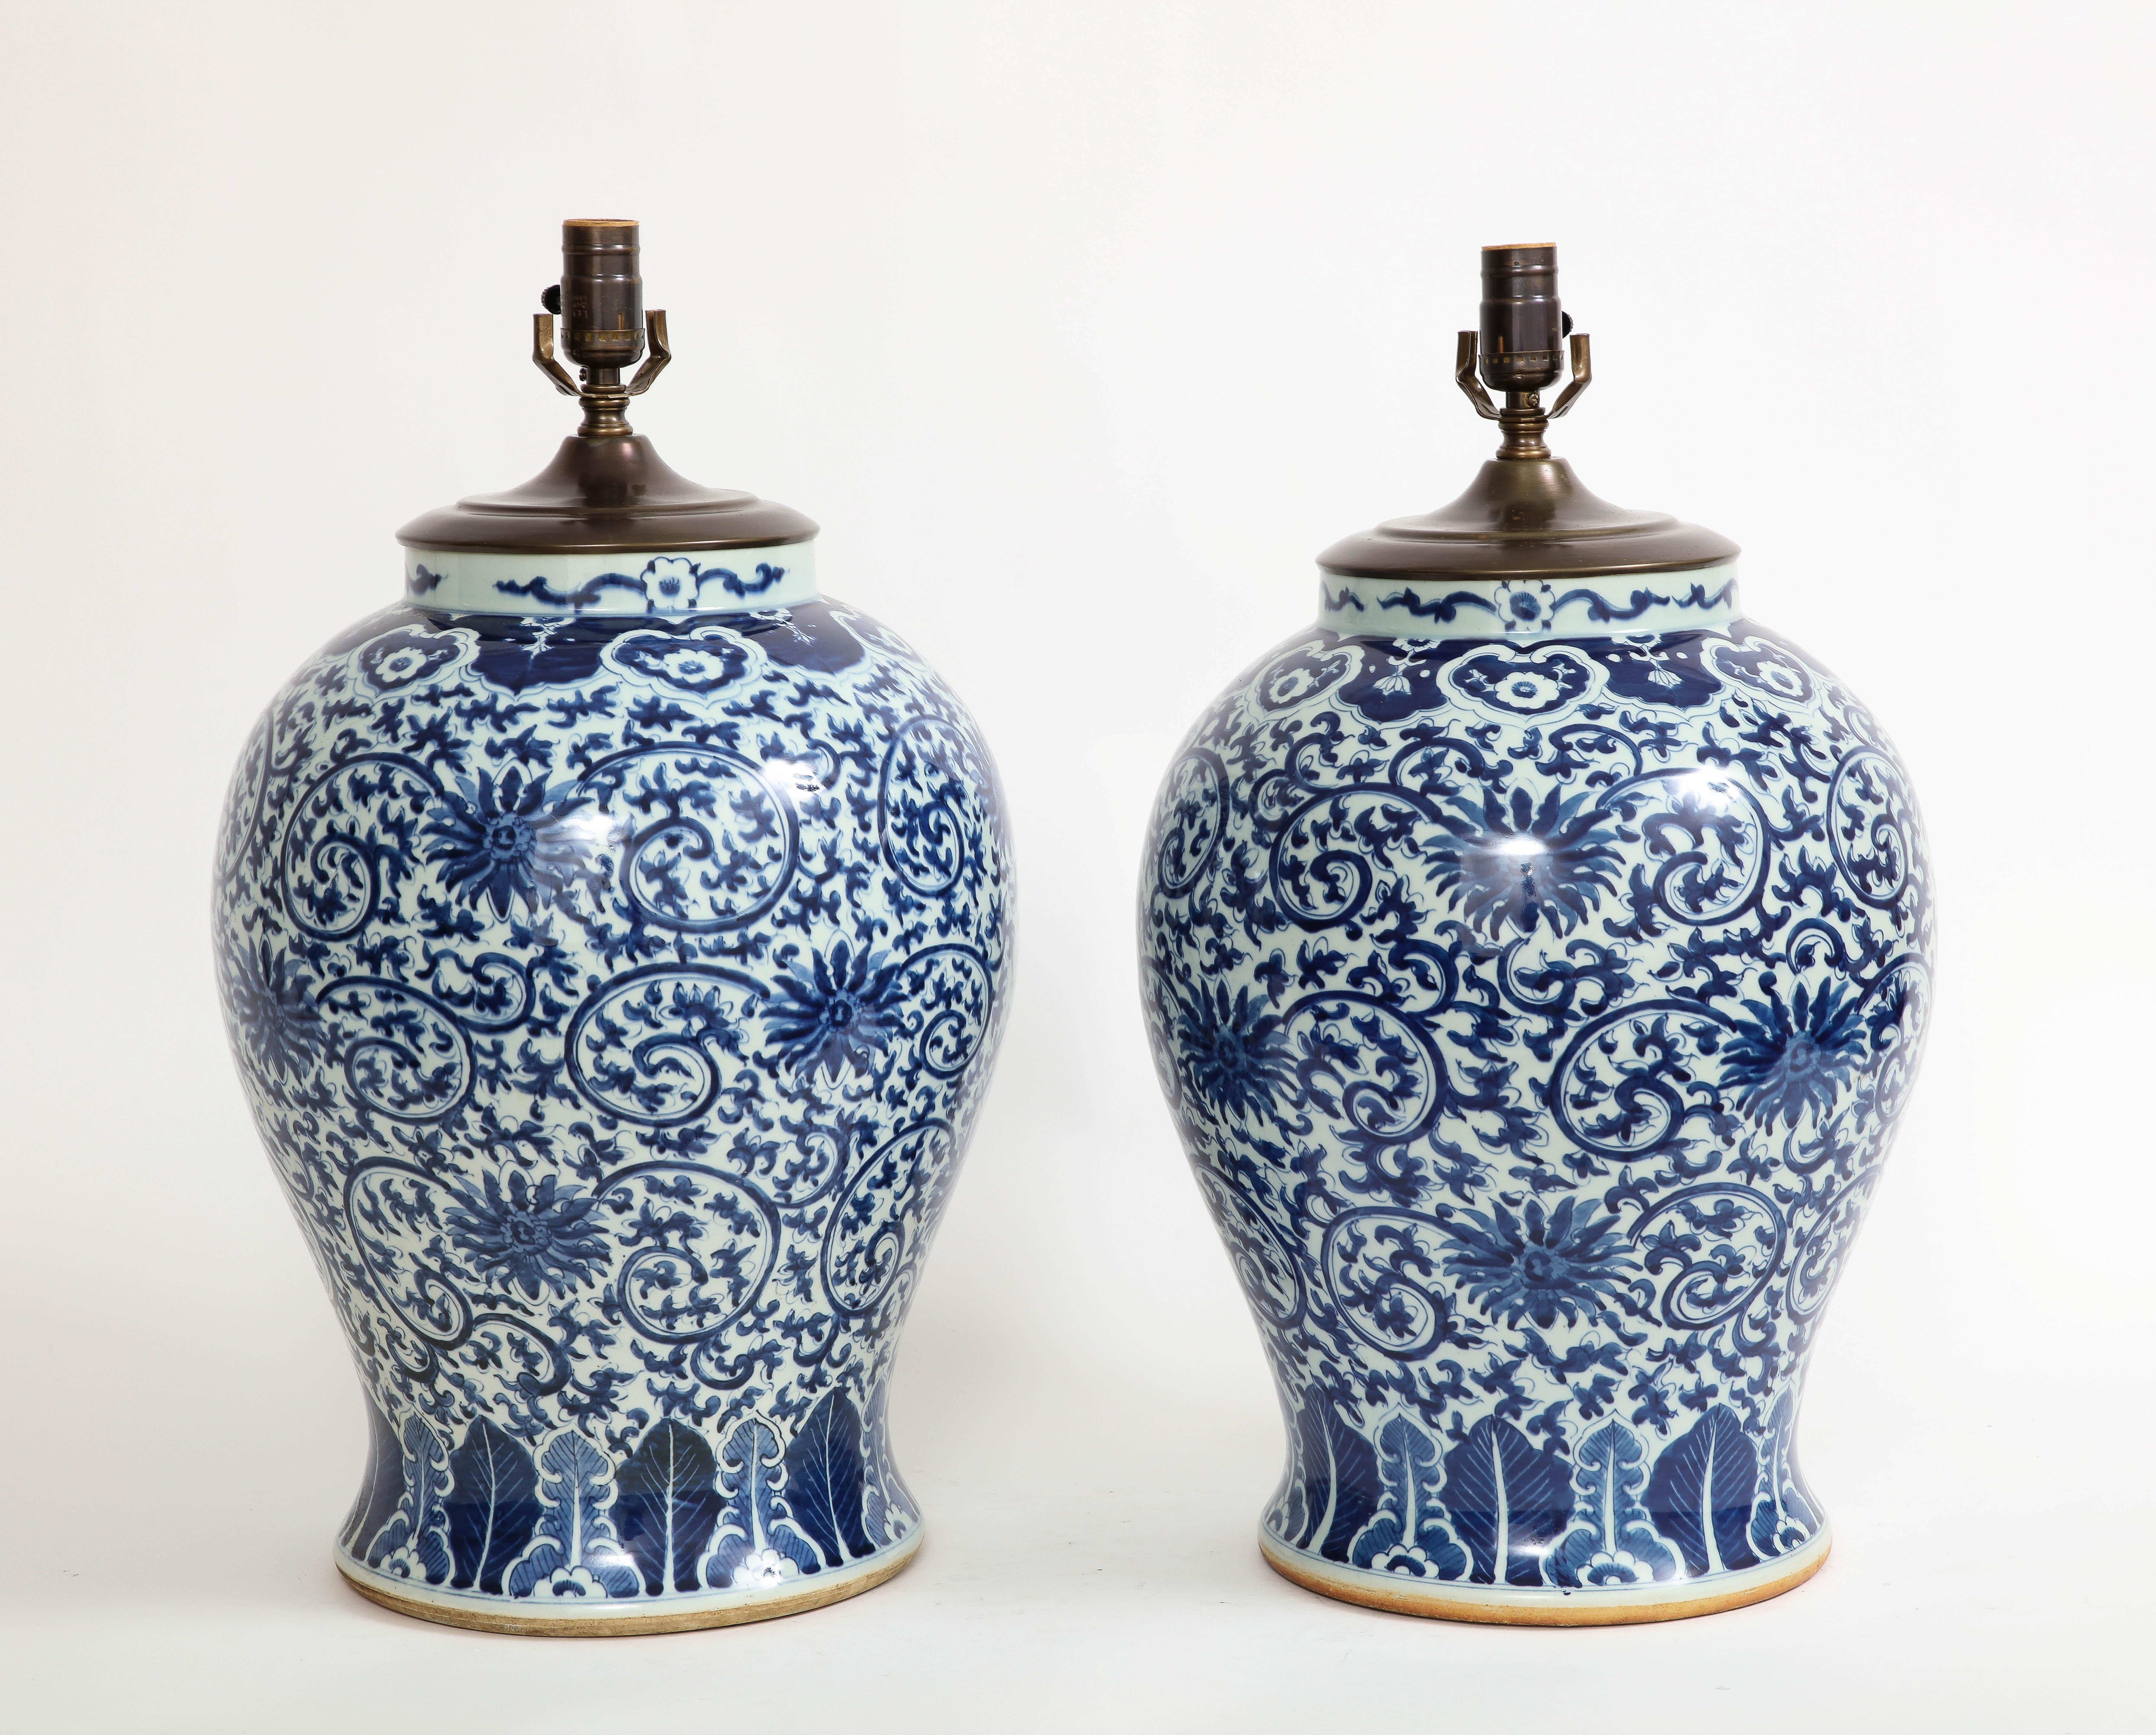 Porcelain Pair of 19th Century Qing Dynasty Chinese Blue and White Vases Turned to Lamps For Sale